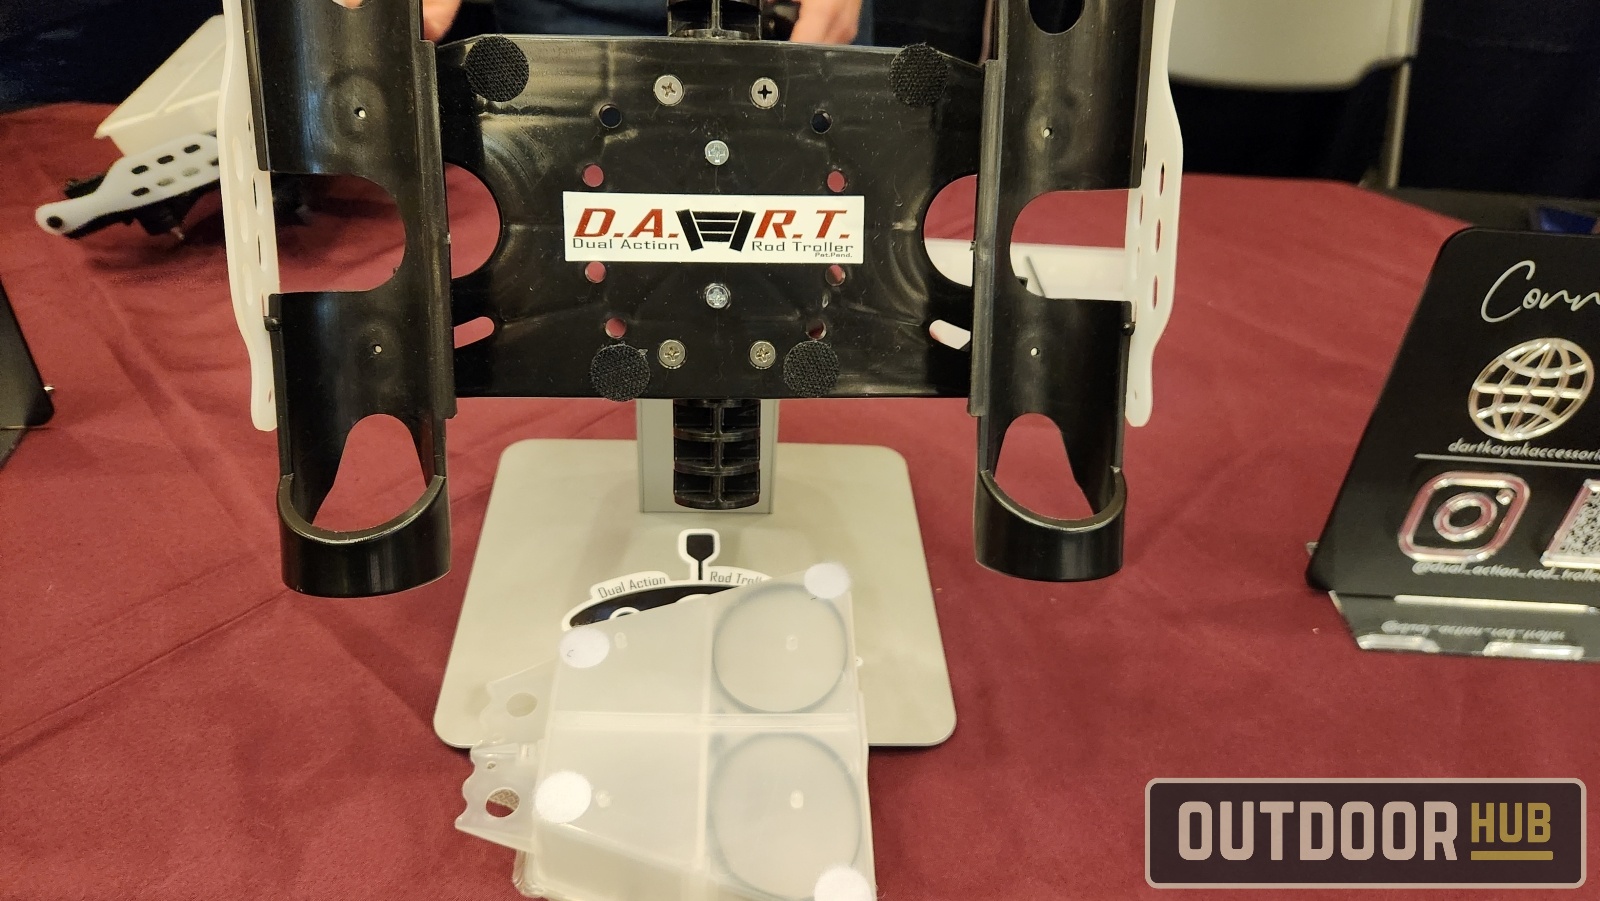 Double your Kayak Rod Holders with the Dual Action Rod Troller – D.A.R.T. 